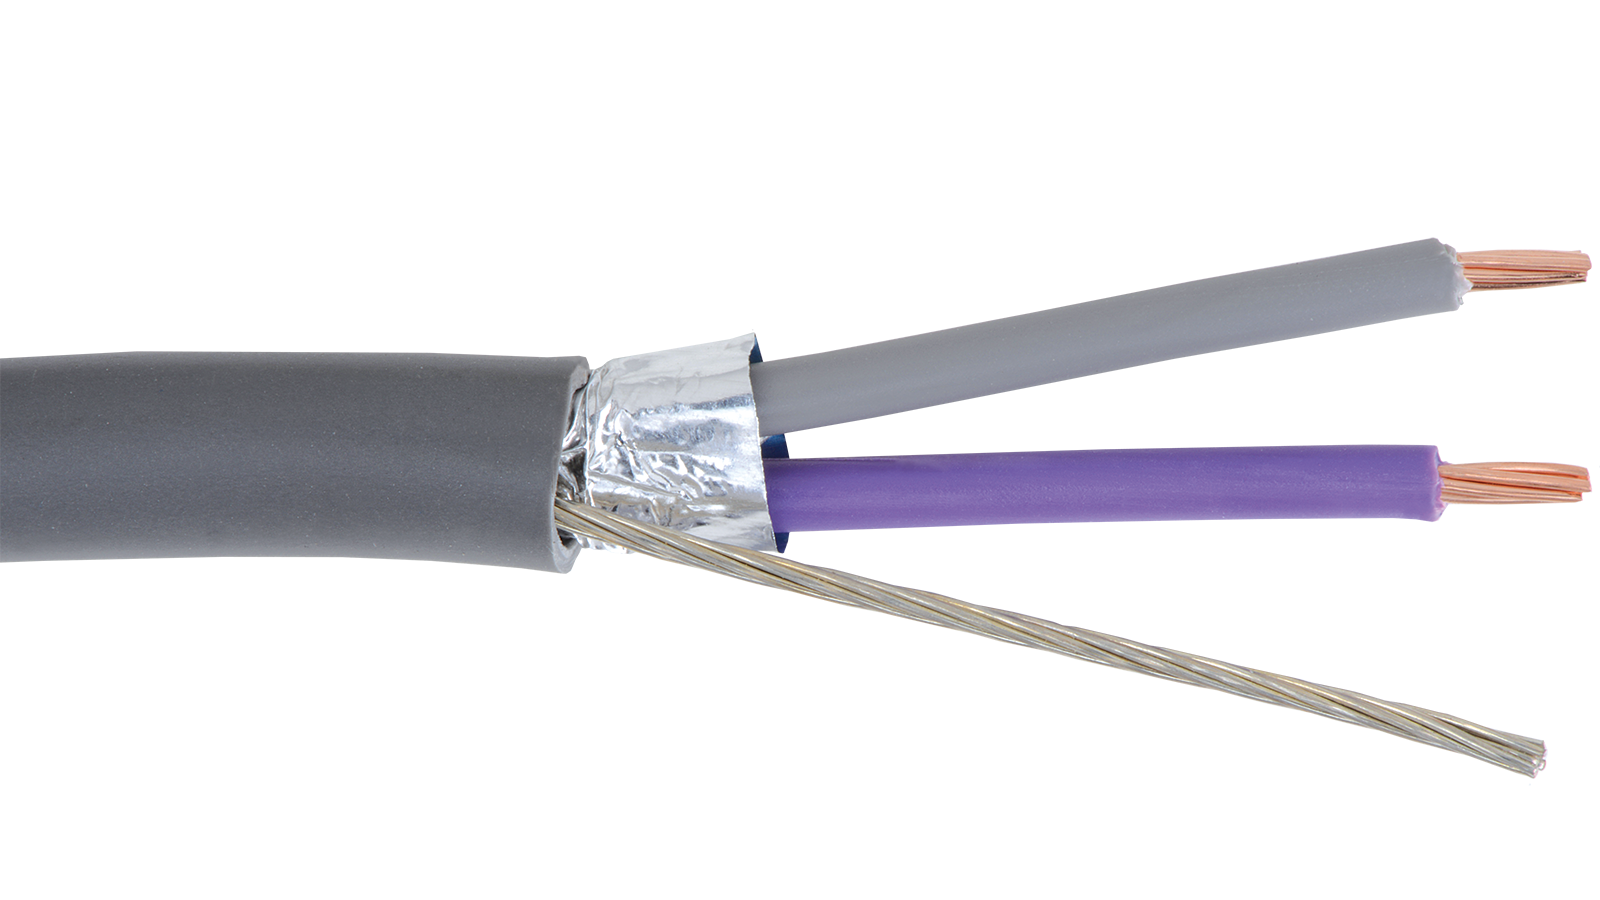 Shielded cable. Кабель Shielded 4 conductor 18 AWG. 18awg кабель. AWG 20 22 экранированный кабель. Кабель экранированный 16 AWG.